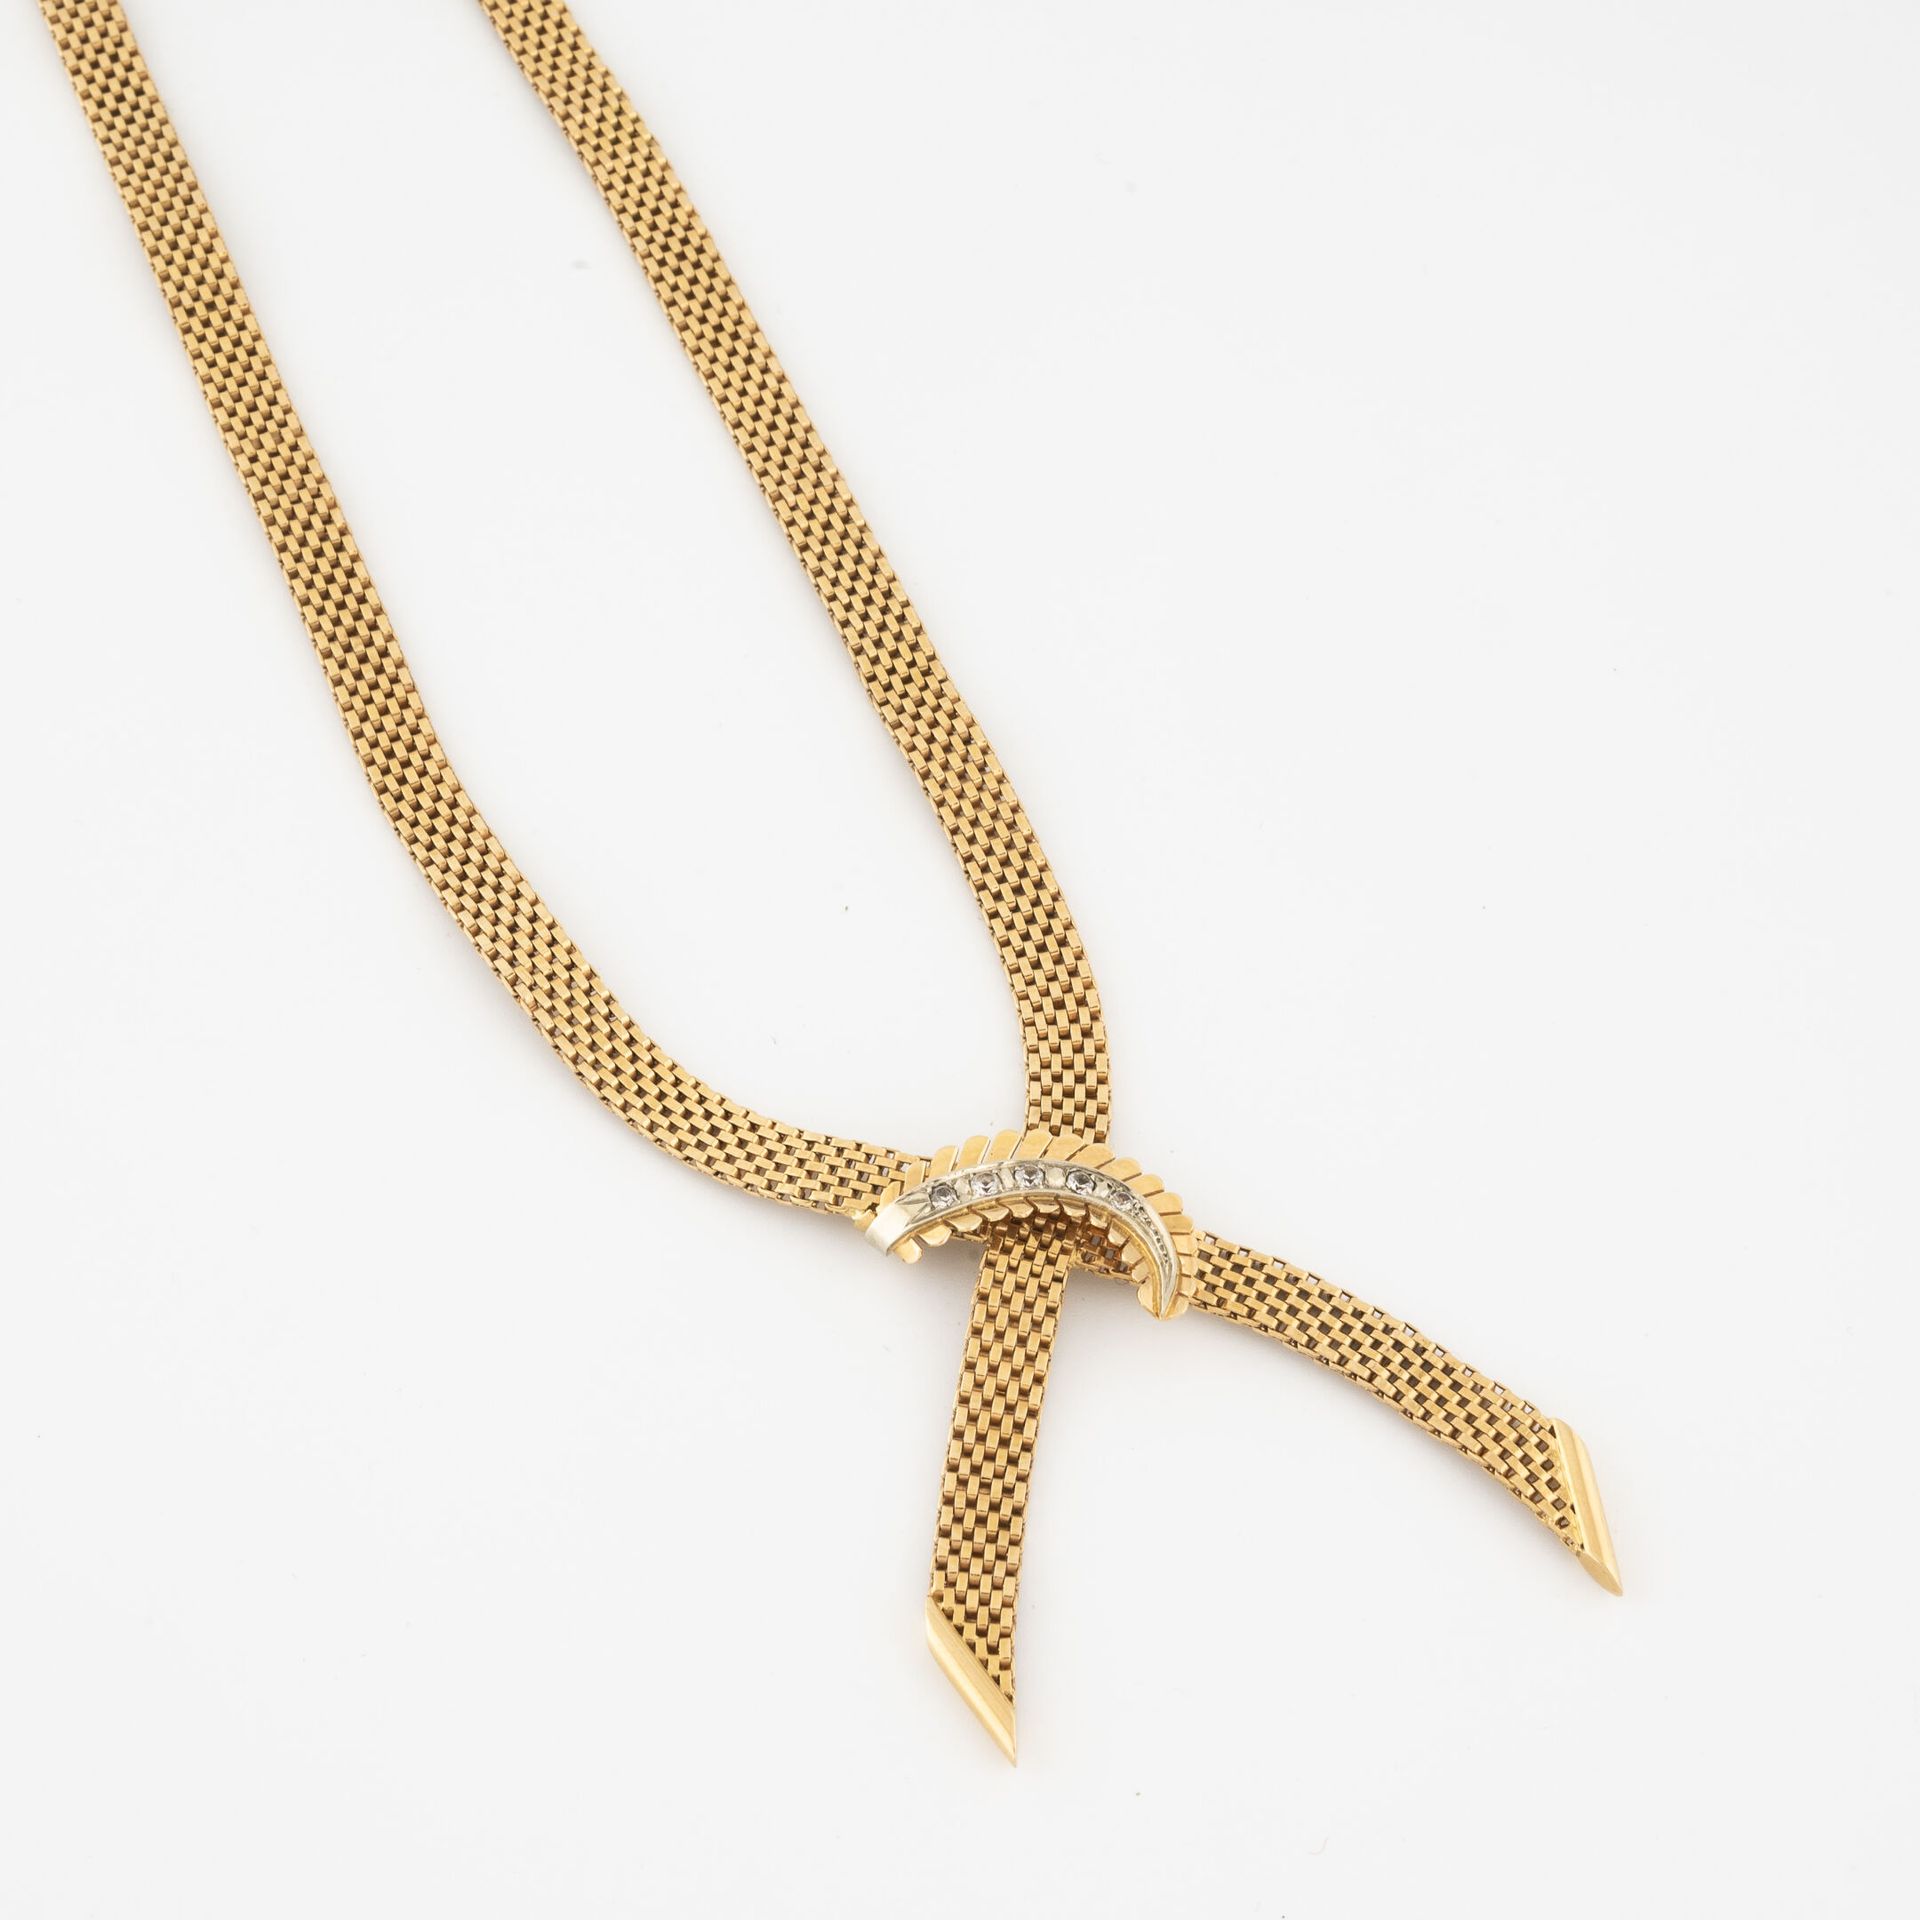 Null Yellow gold (750) flat link necklace, the neckline knotted with a leaf moti&hellip;